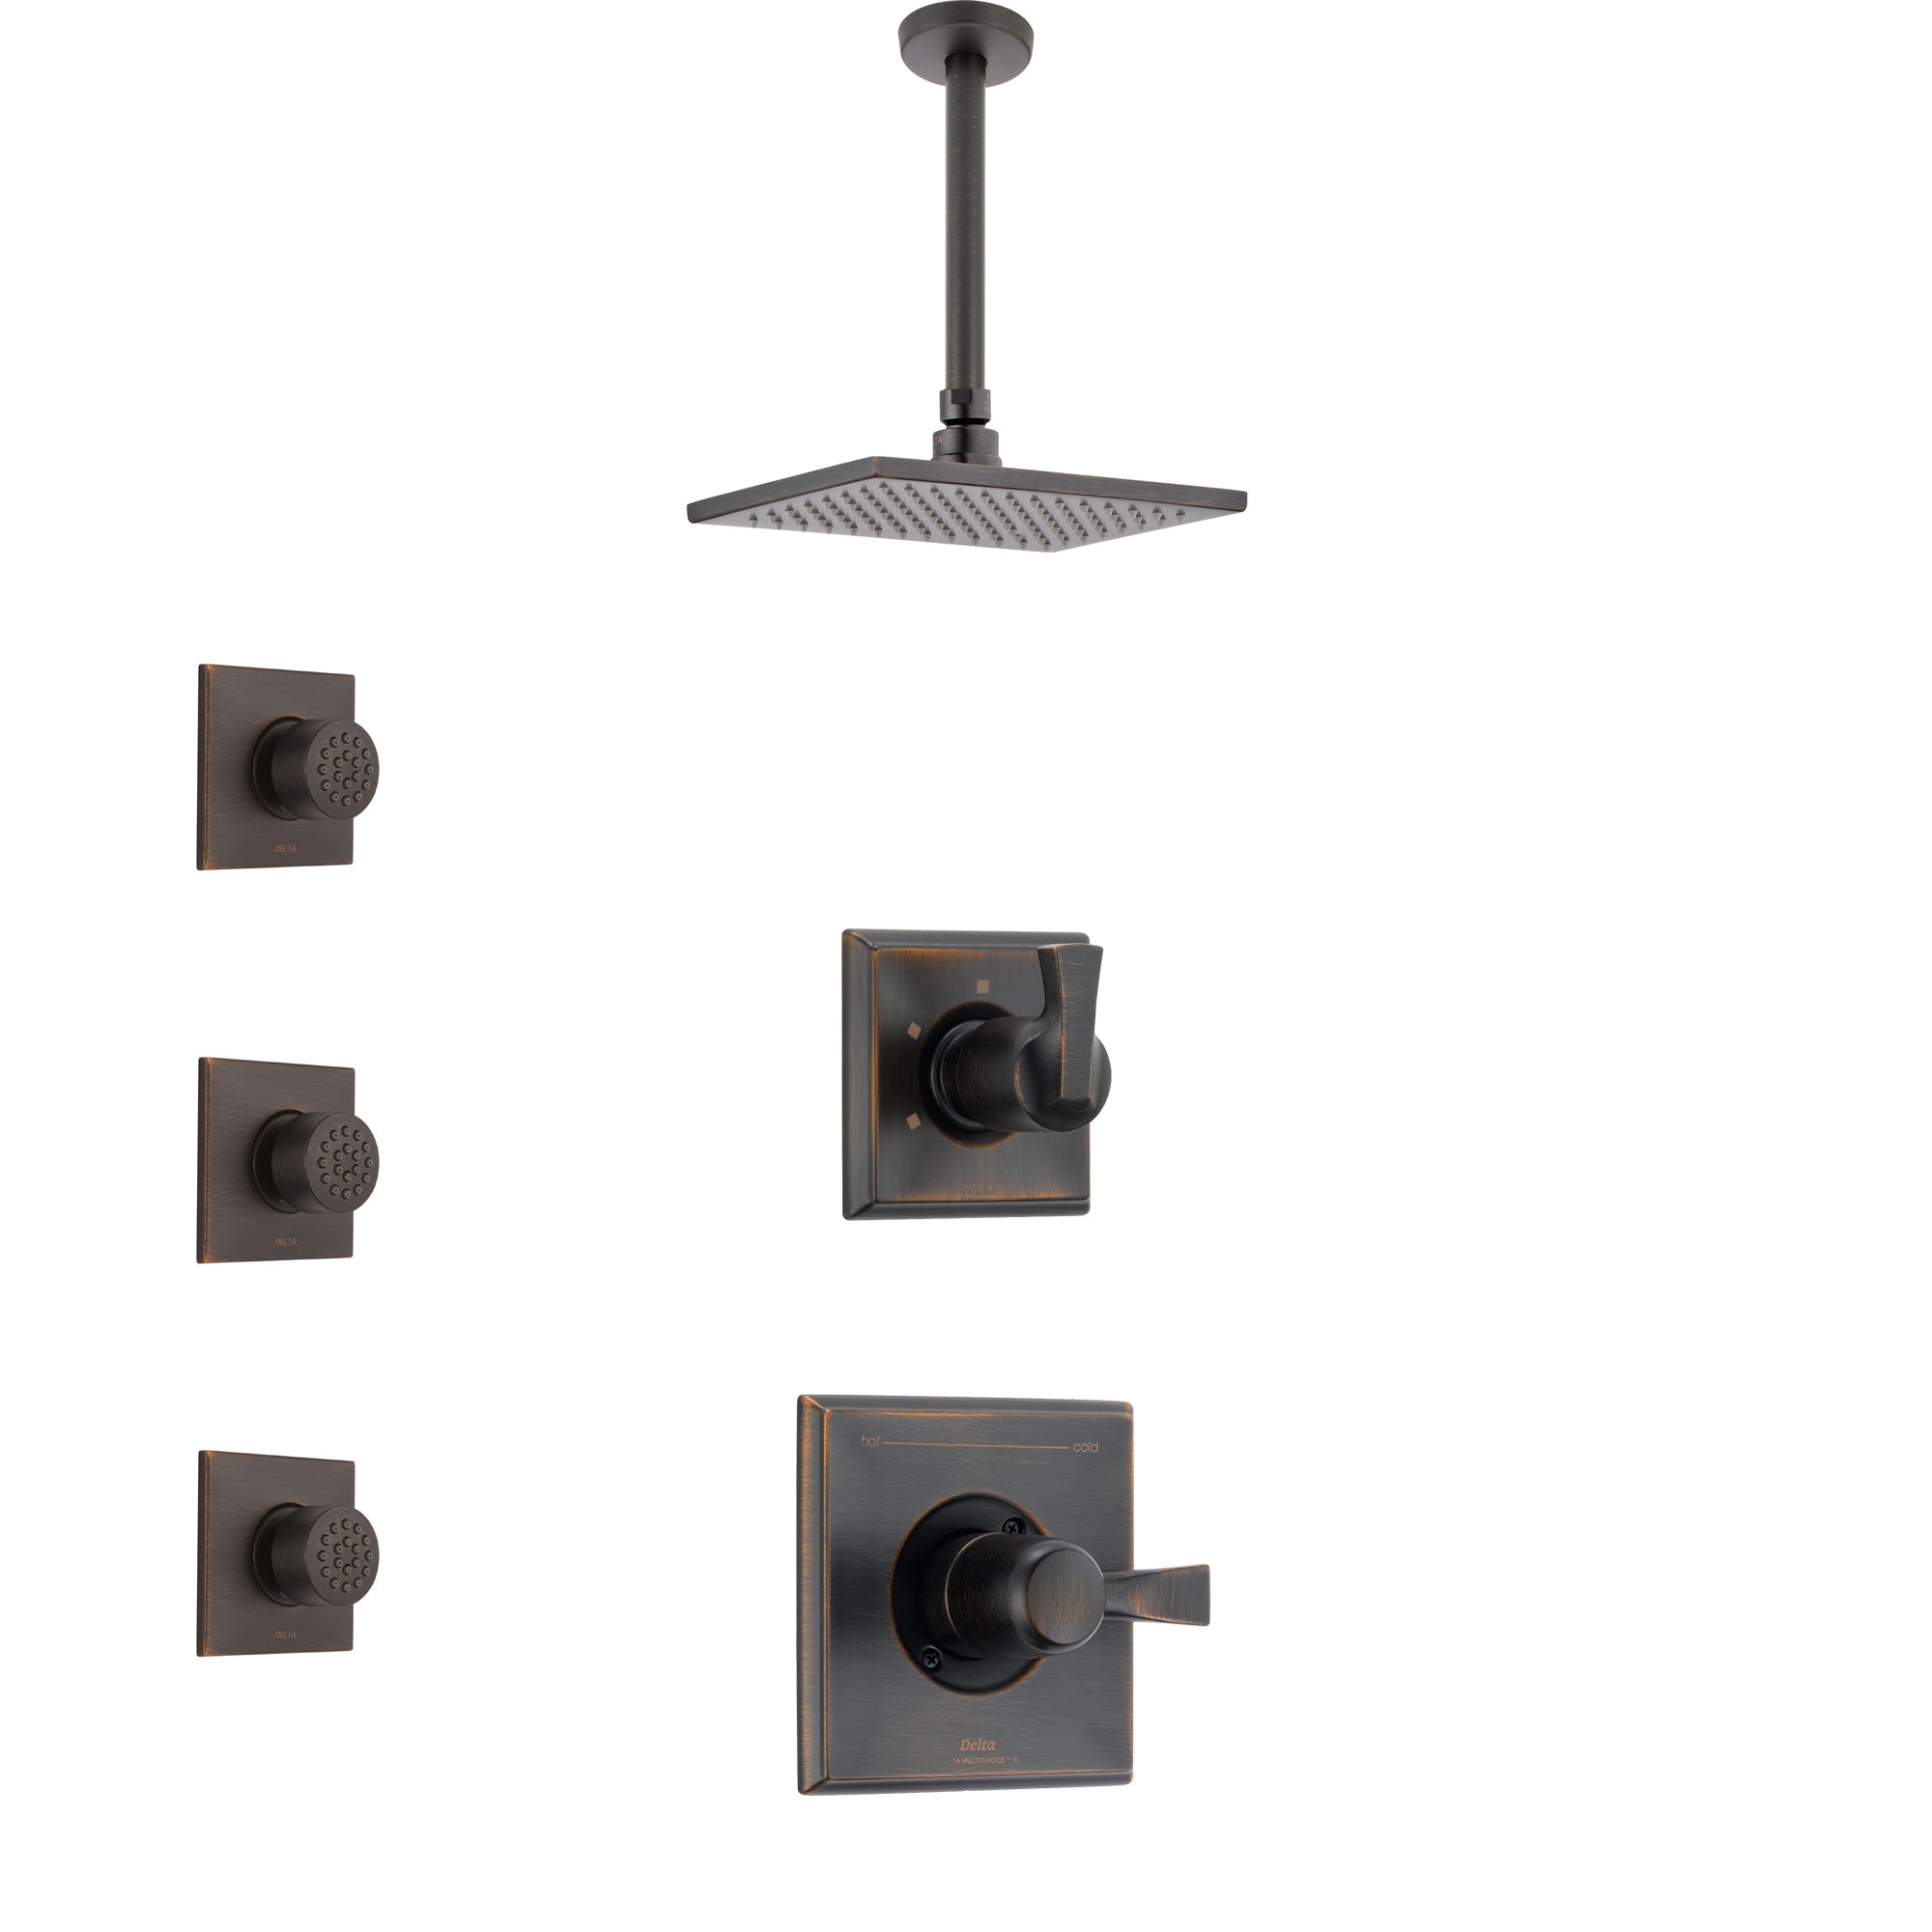 Delta Dryden Venetian Bronze Finish Shower System with Control Handle, 3-Setting Diverter, Ceiling Mount Showerhead, and 3 Body Sprays SS1451RB8